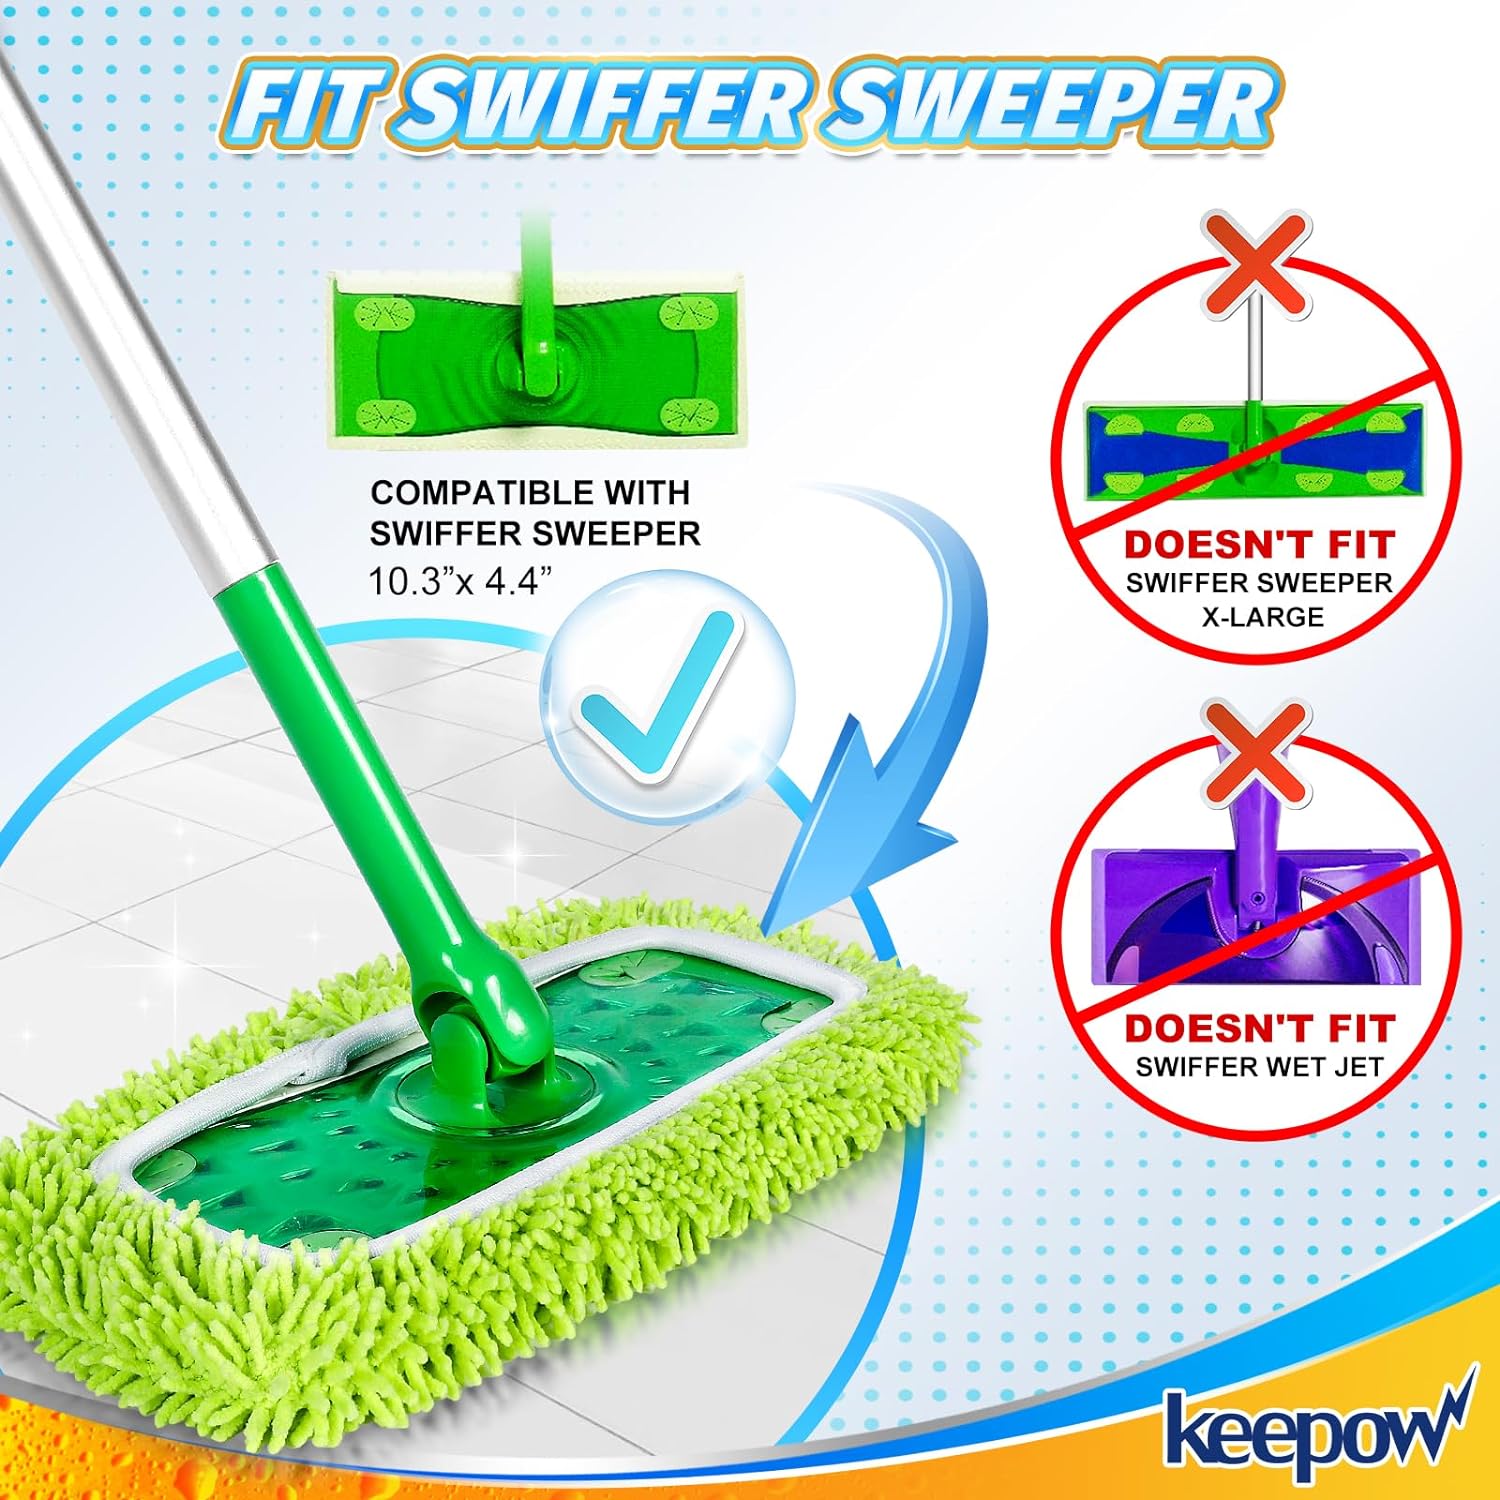 KEEPOW 5701M Reusable Microfiber Mop Pads Compatible with Swiffer Sweeper Mop 8 Pack